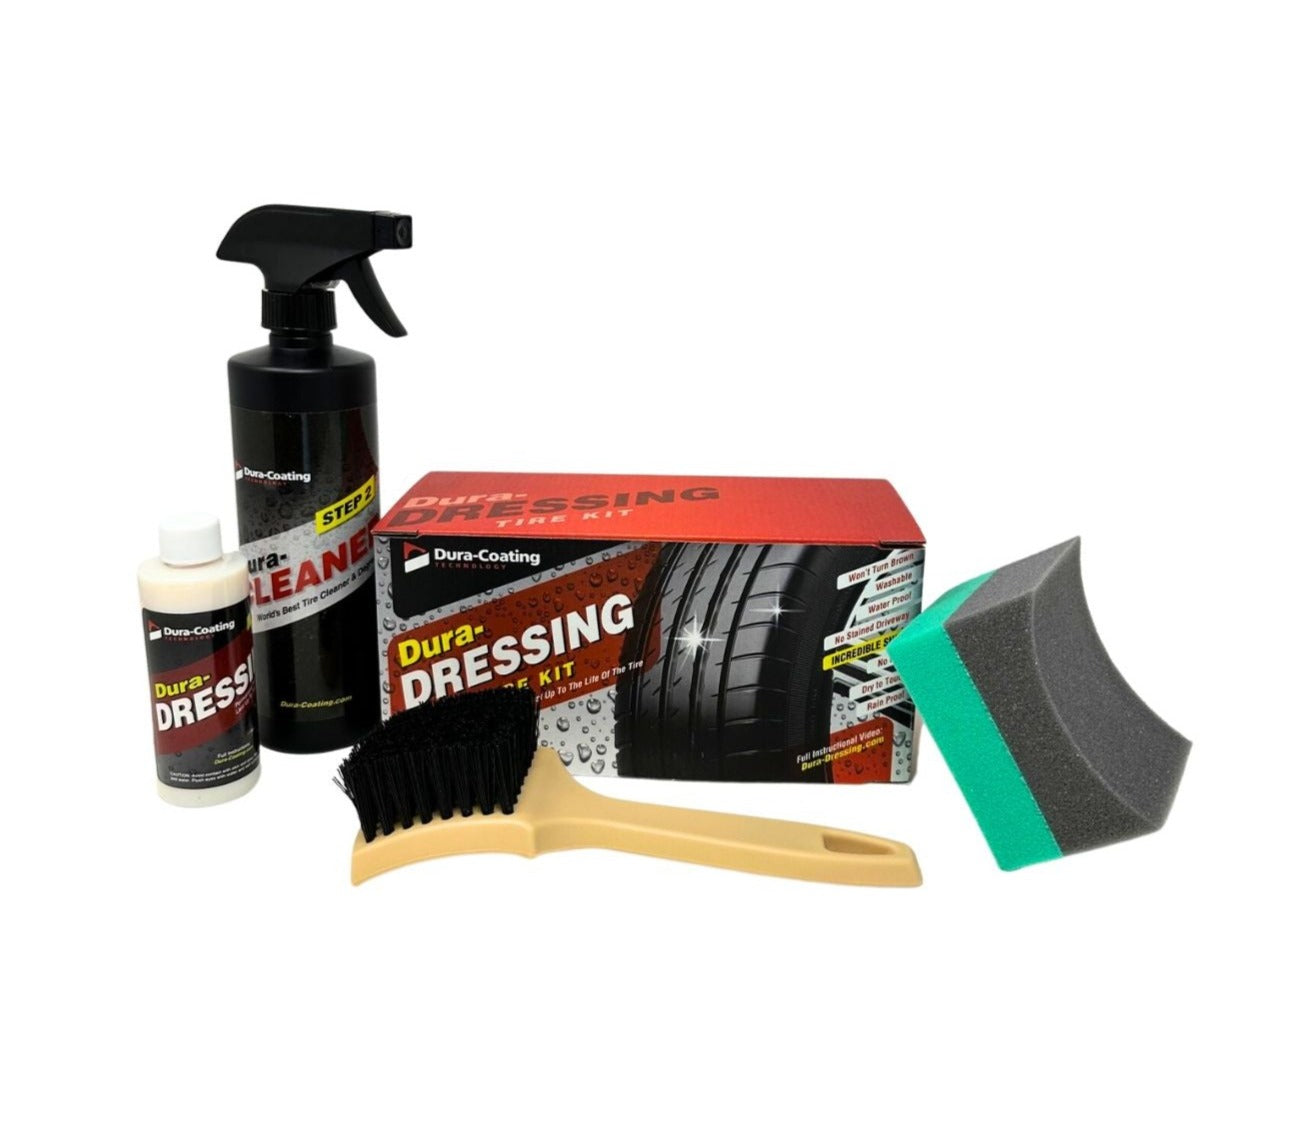 Dura-Coating Technology Dura-Dressing Tire Dressing Re-Load Kit, for Tires Already Coated with Dura-Dressing - Car Tire Shine for Ultimate High Gloss